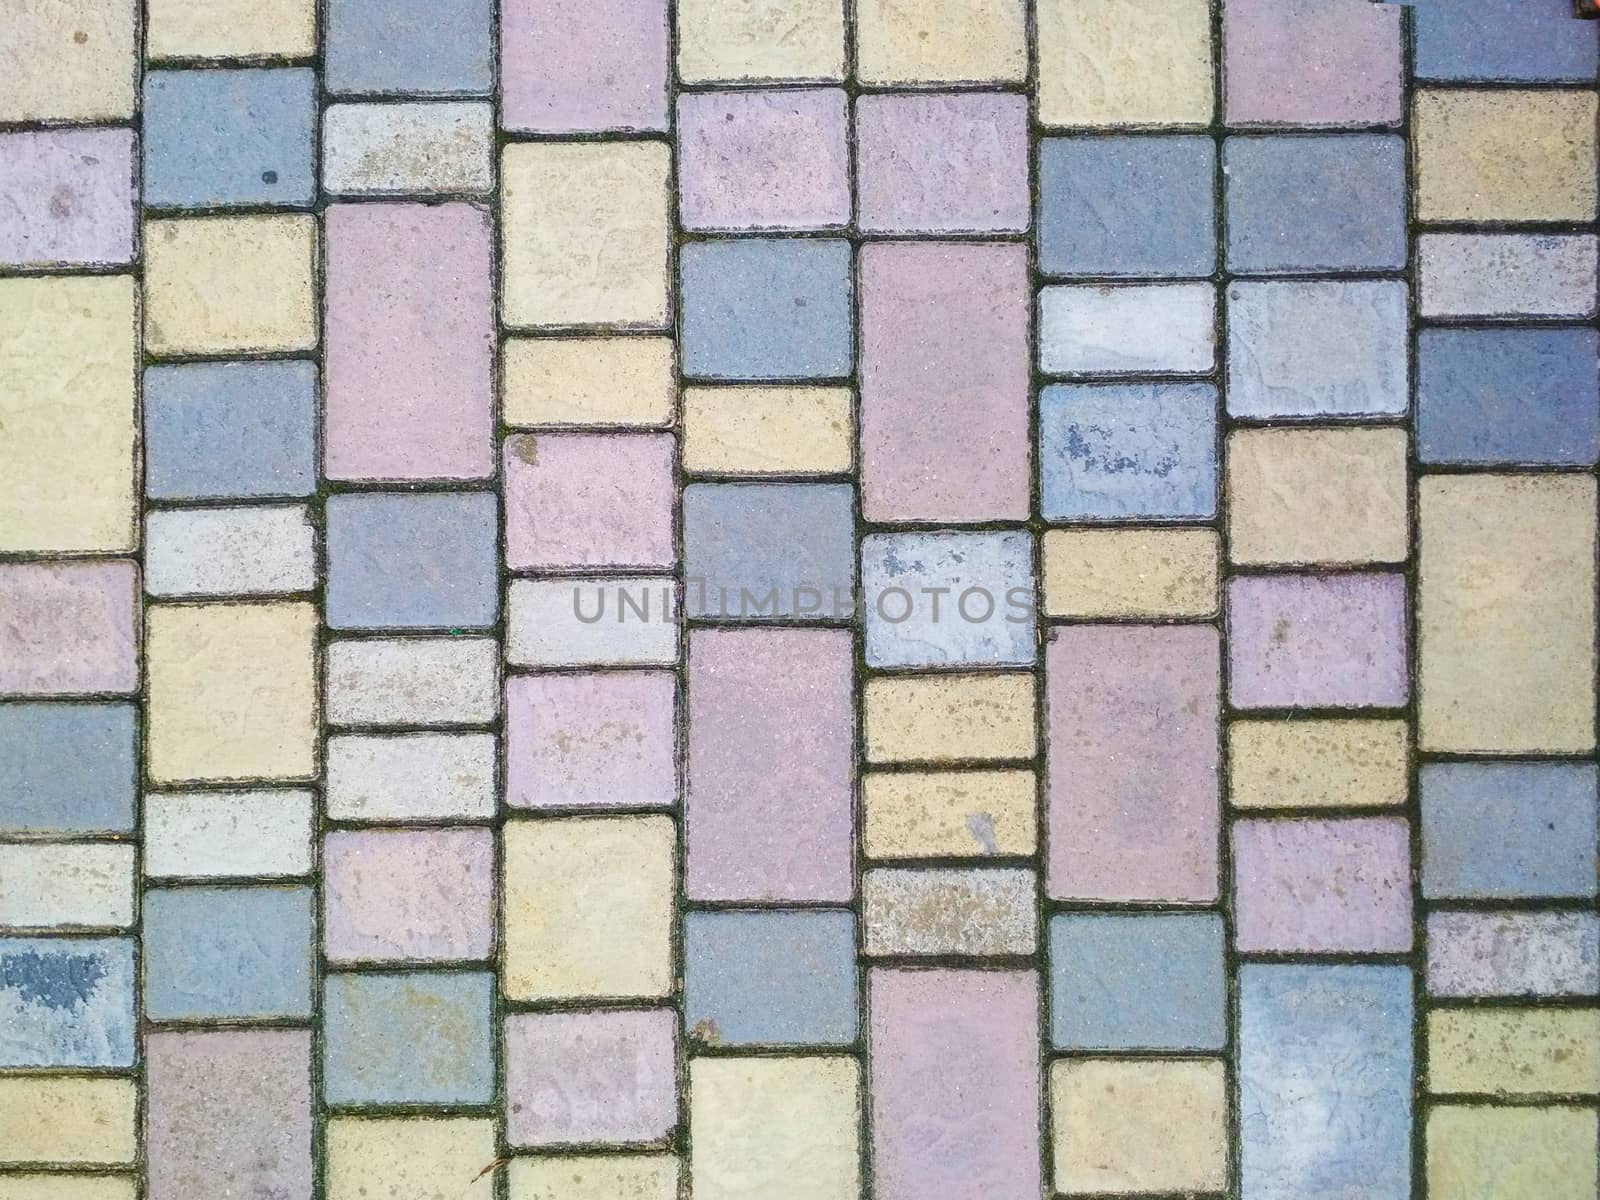 Pavement tiles of different colors and shapes.

Stacked rows of stones of the correct shape of different colors.